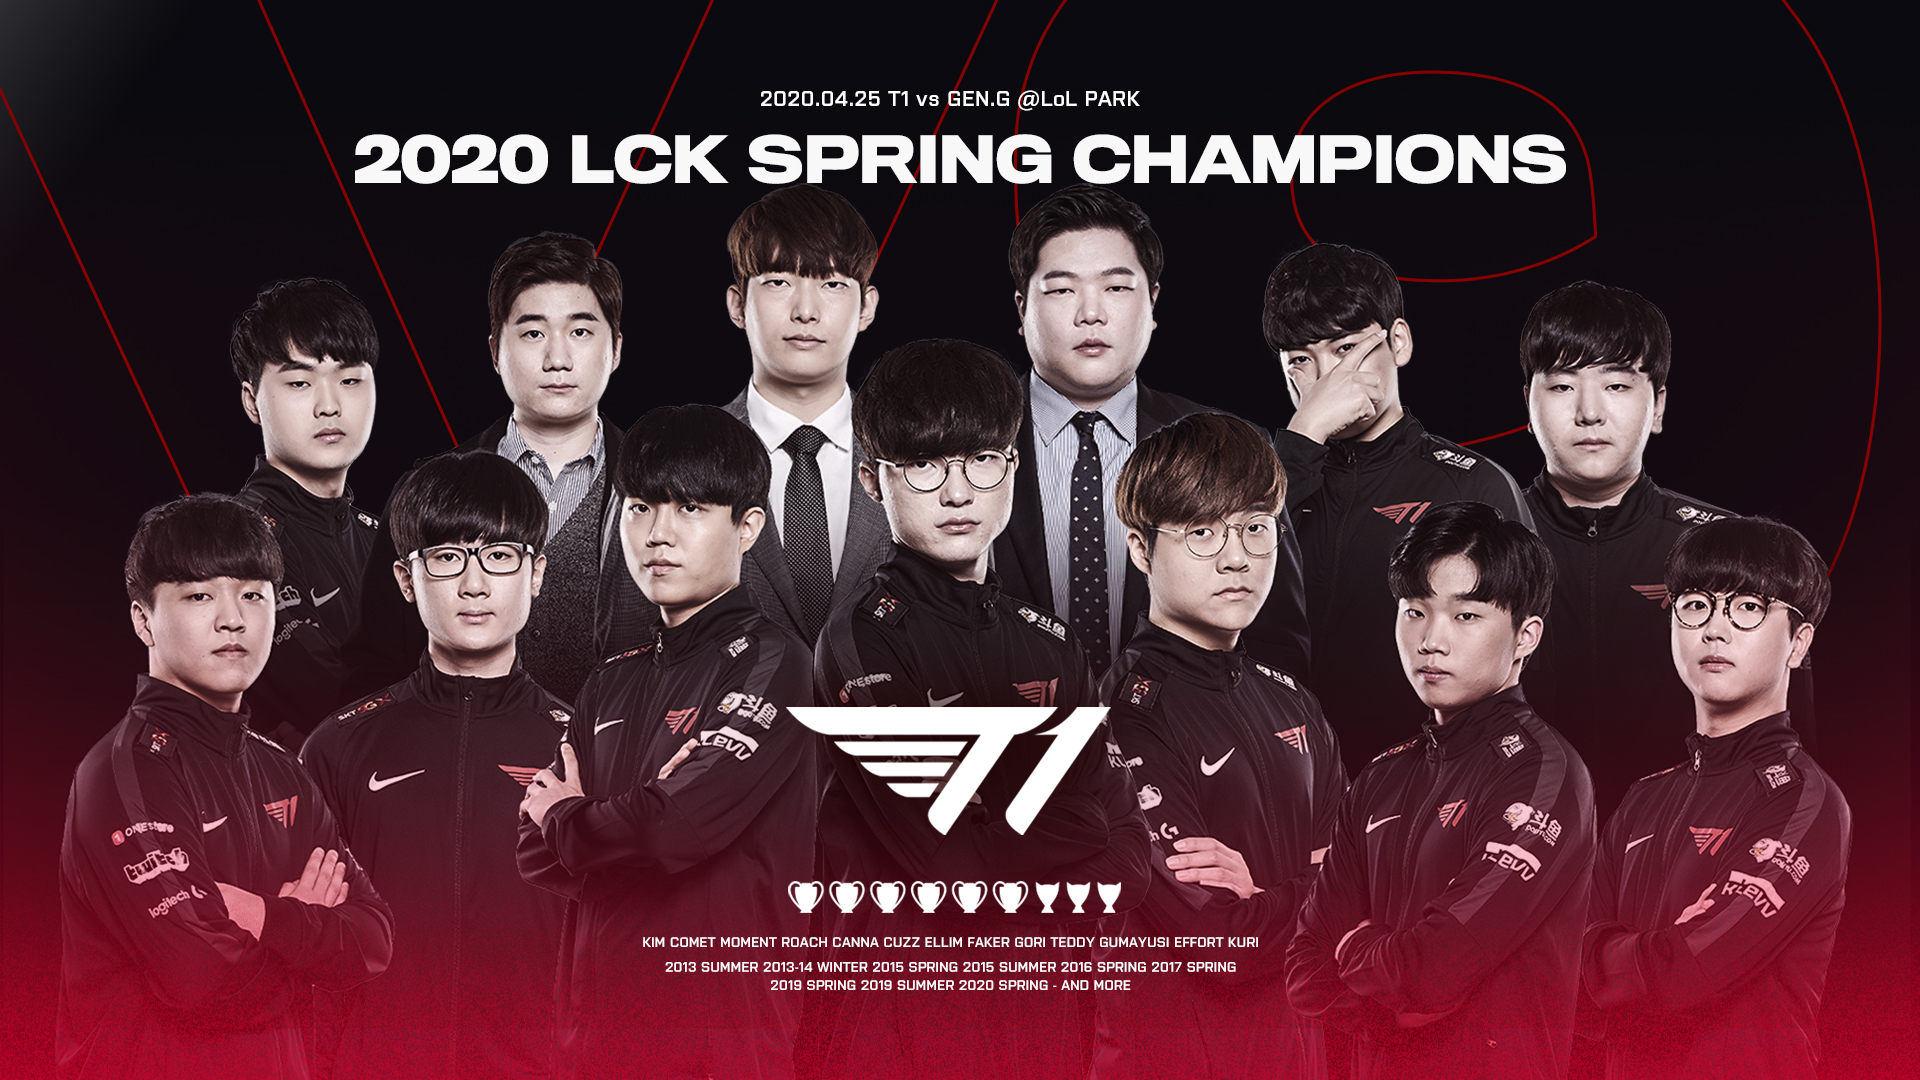 T1 are the LCK 2020 Spring Finals Champions